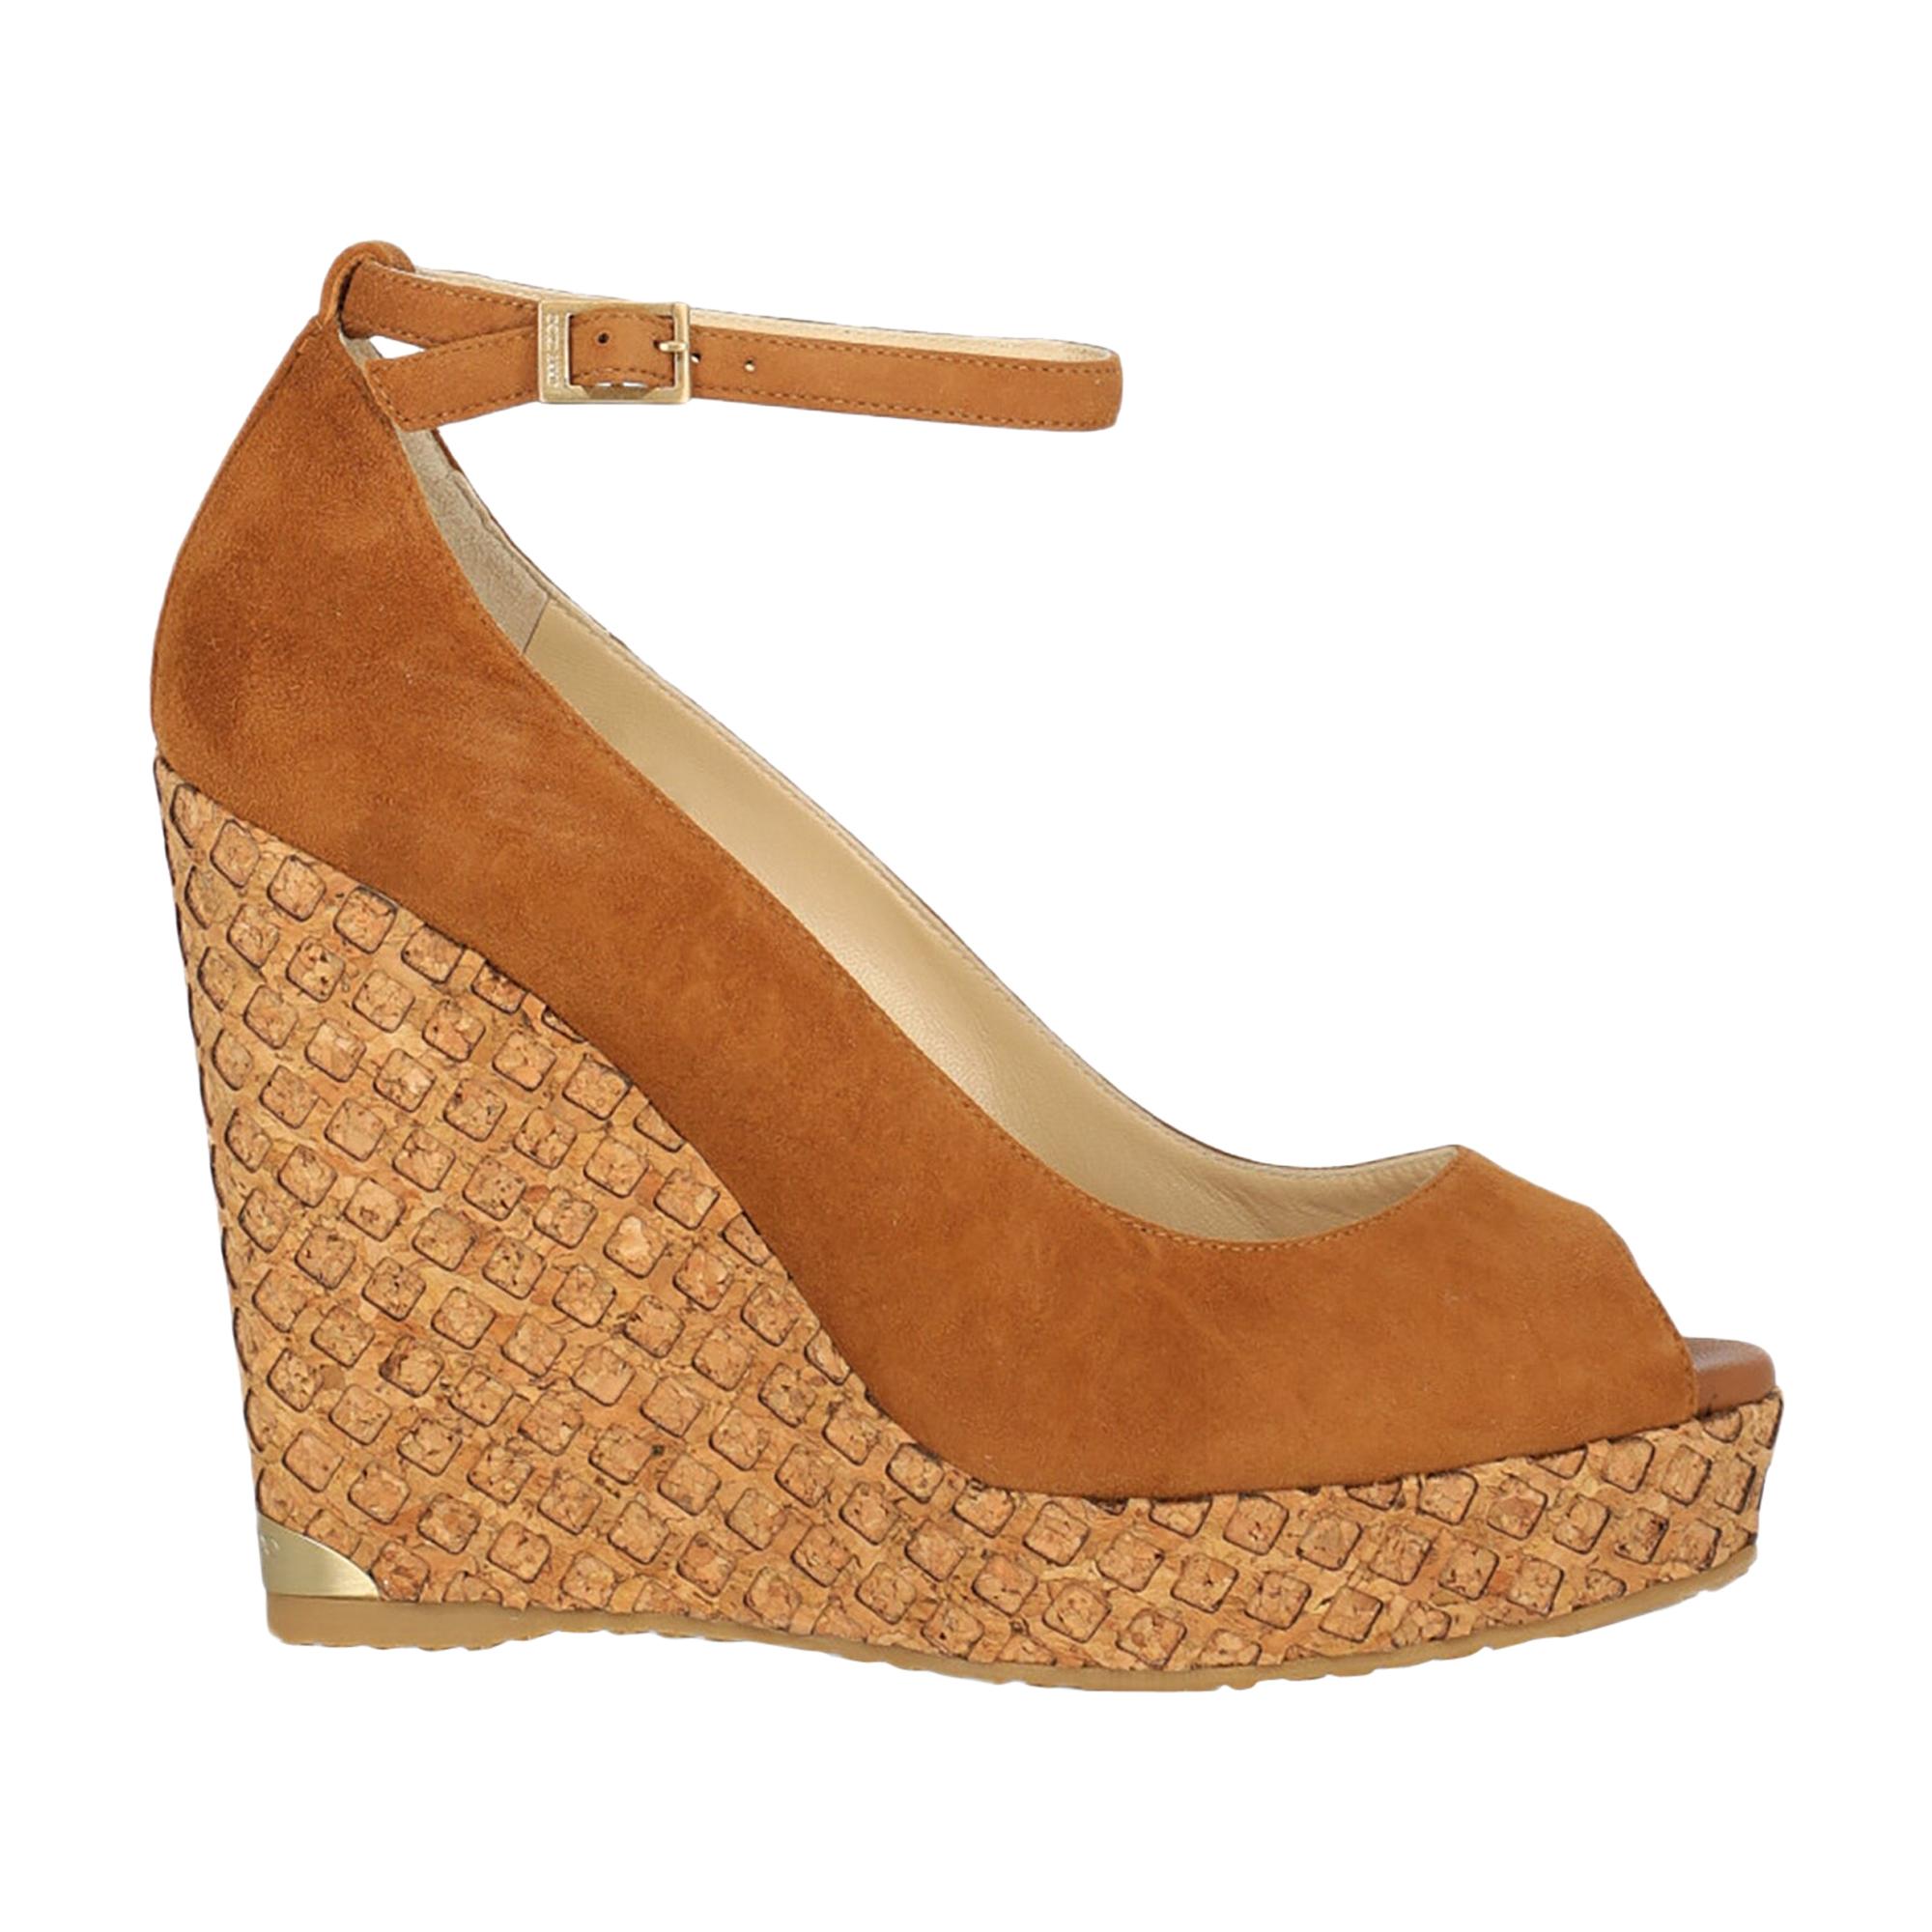 Jimmy Choo Woman Wedges Camel Color Leather IT 41 For Sale